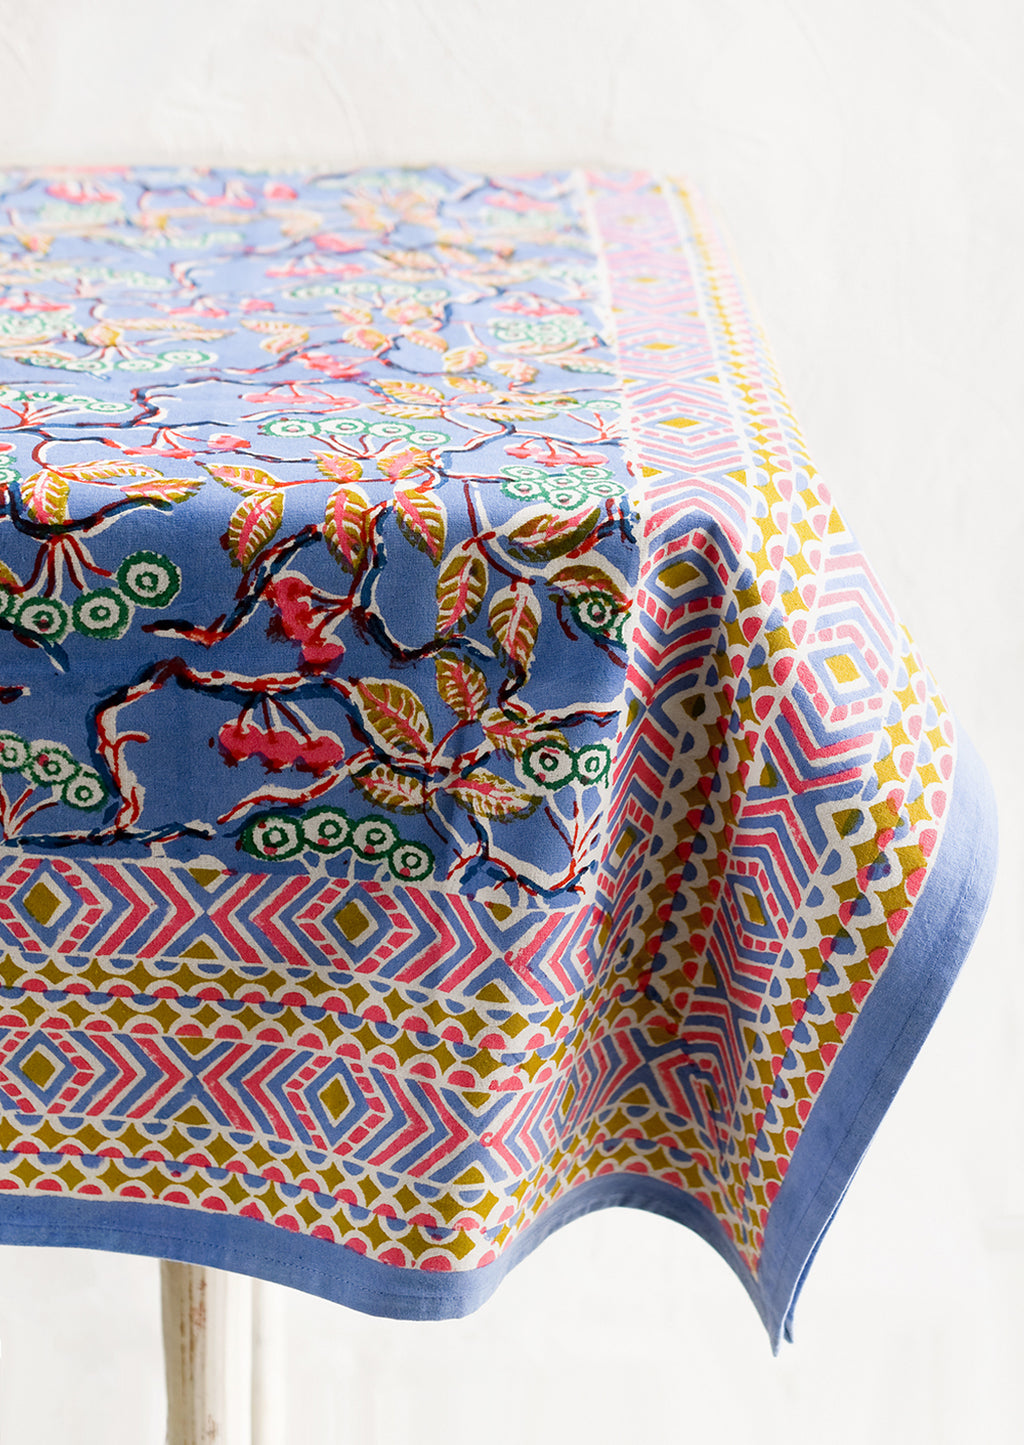 2: A block printed table cloth in yellow, blue and pink floral print with geometric border.